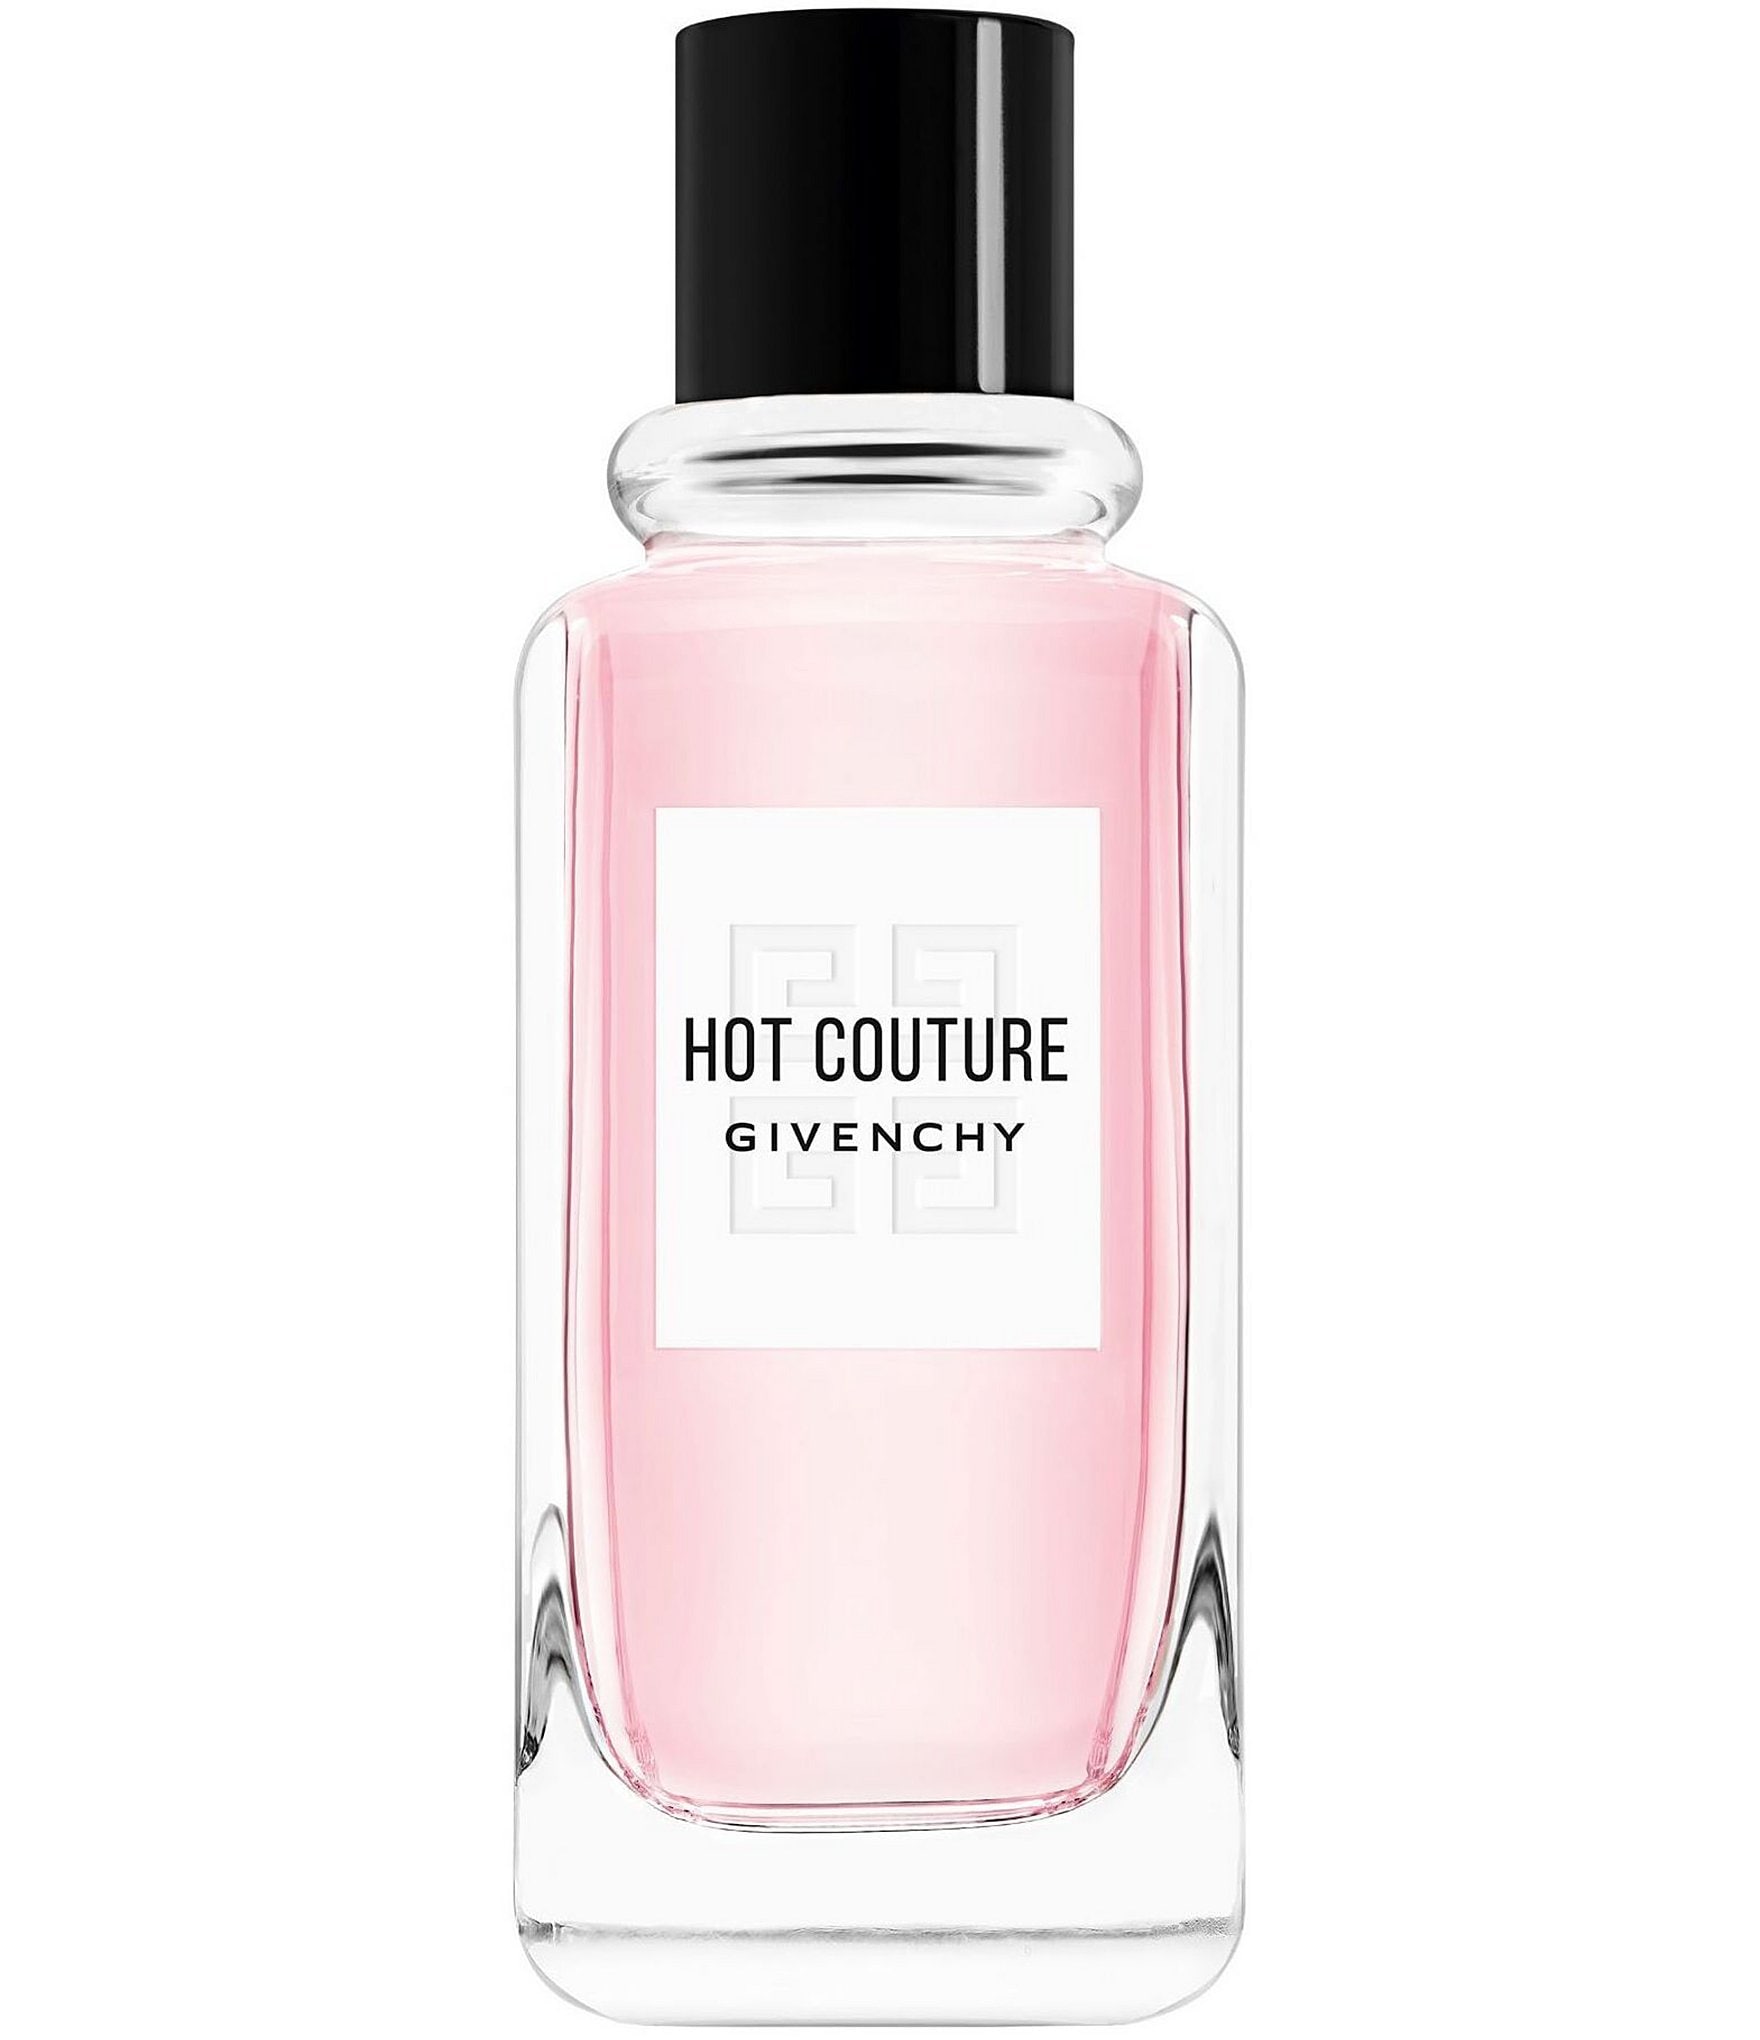 hot couture by givenchy